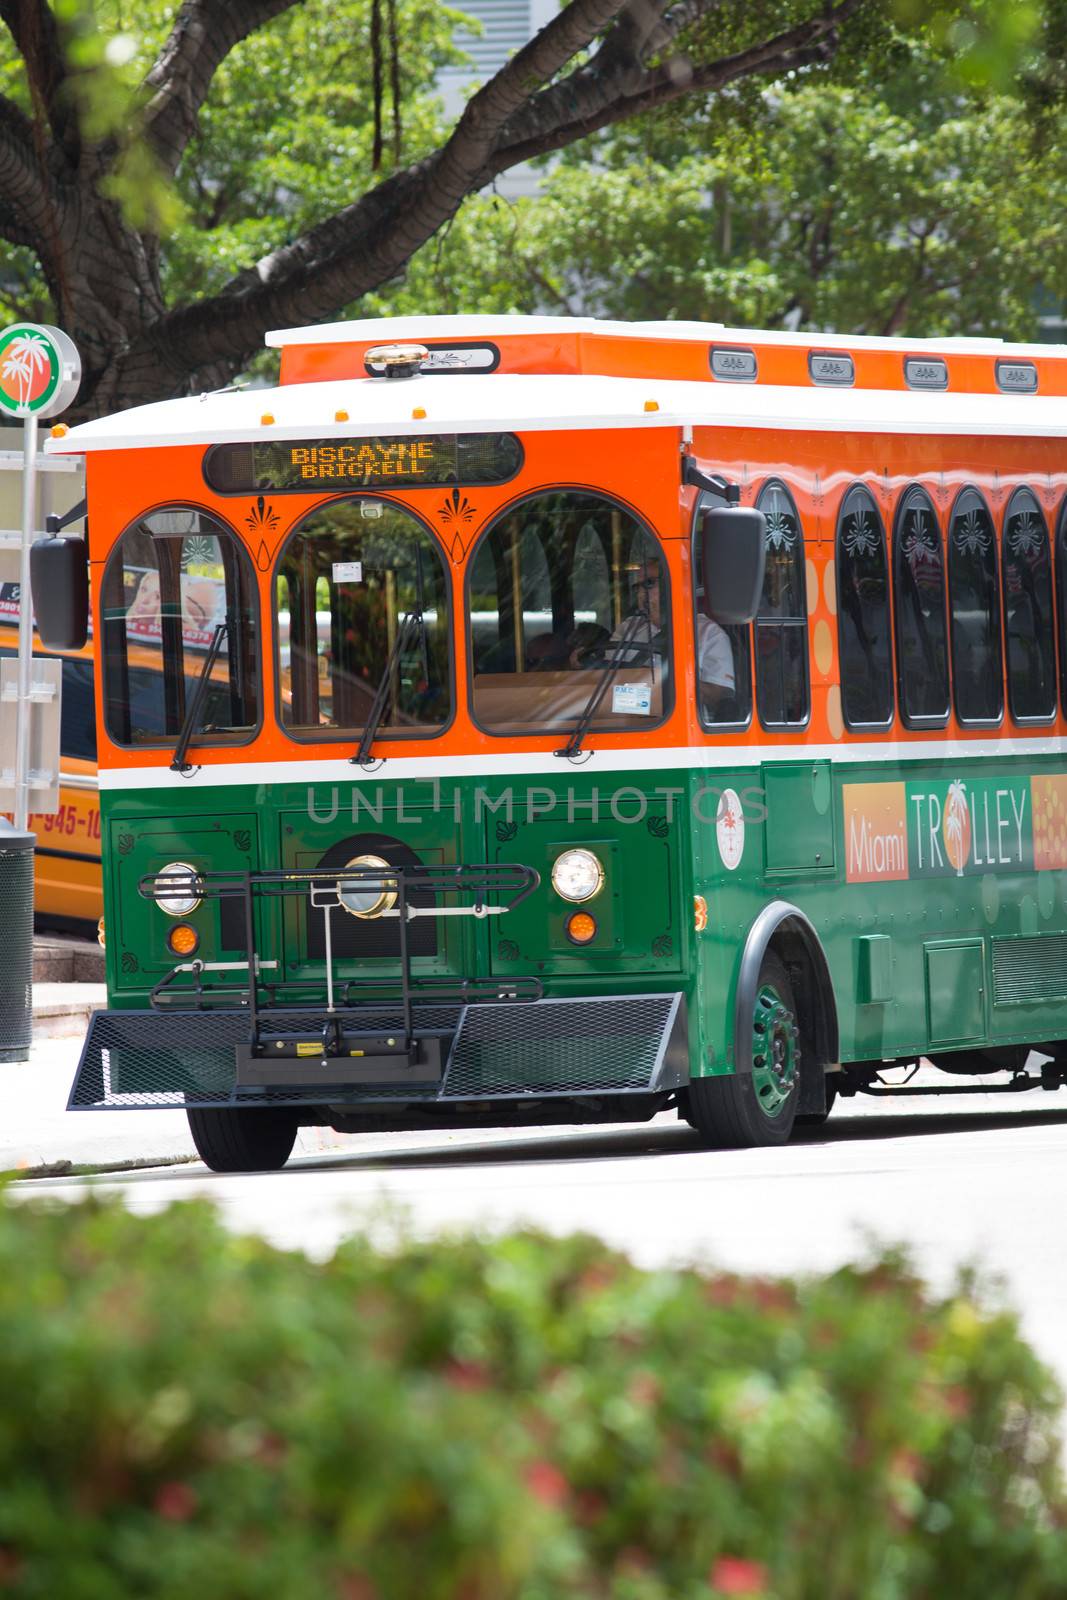 The New Trolley, subsidized service that operates in Miami